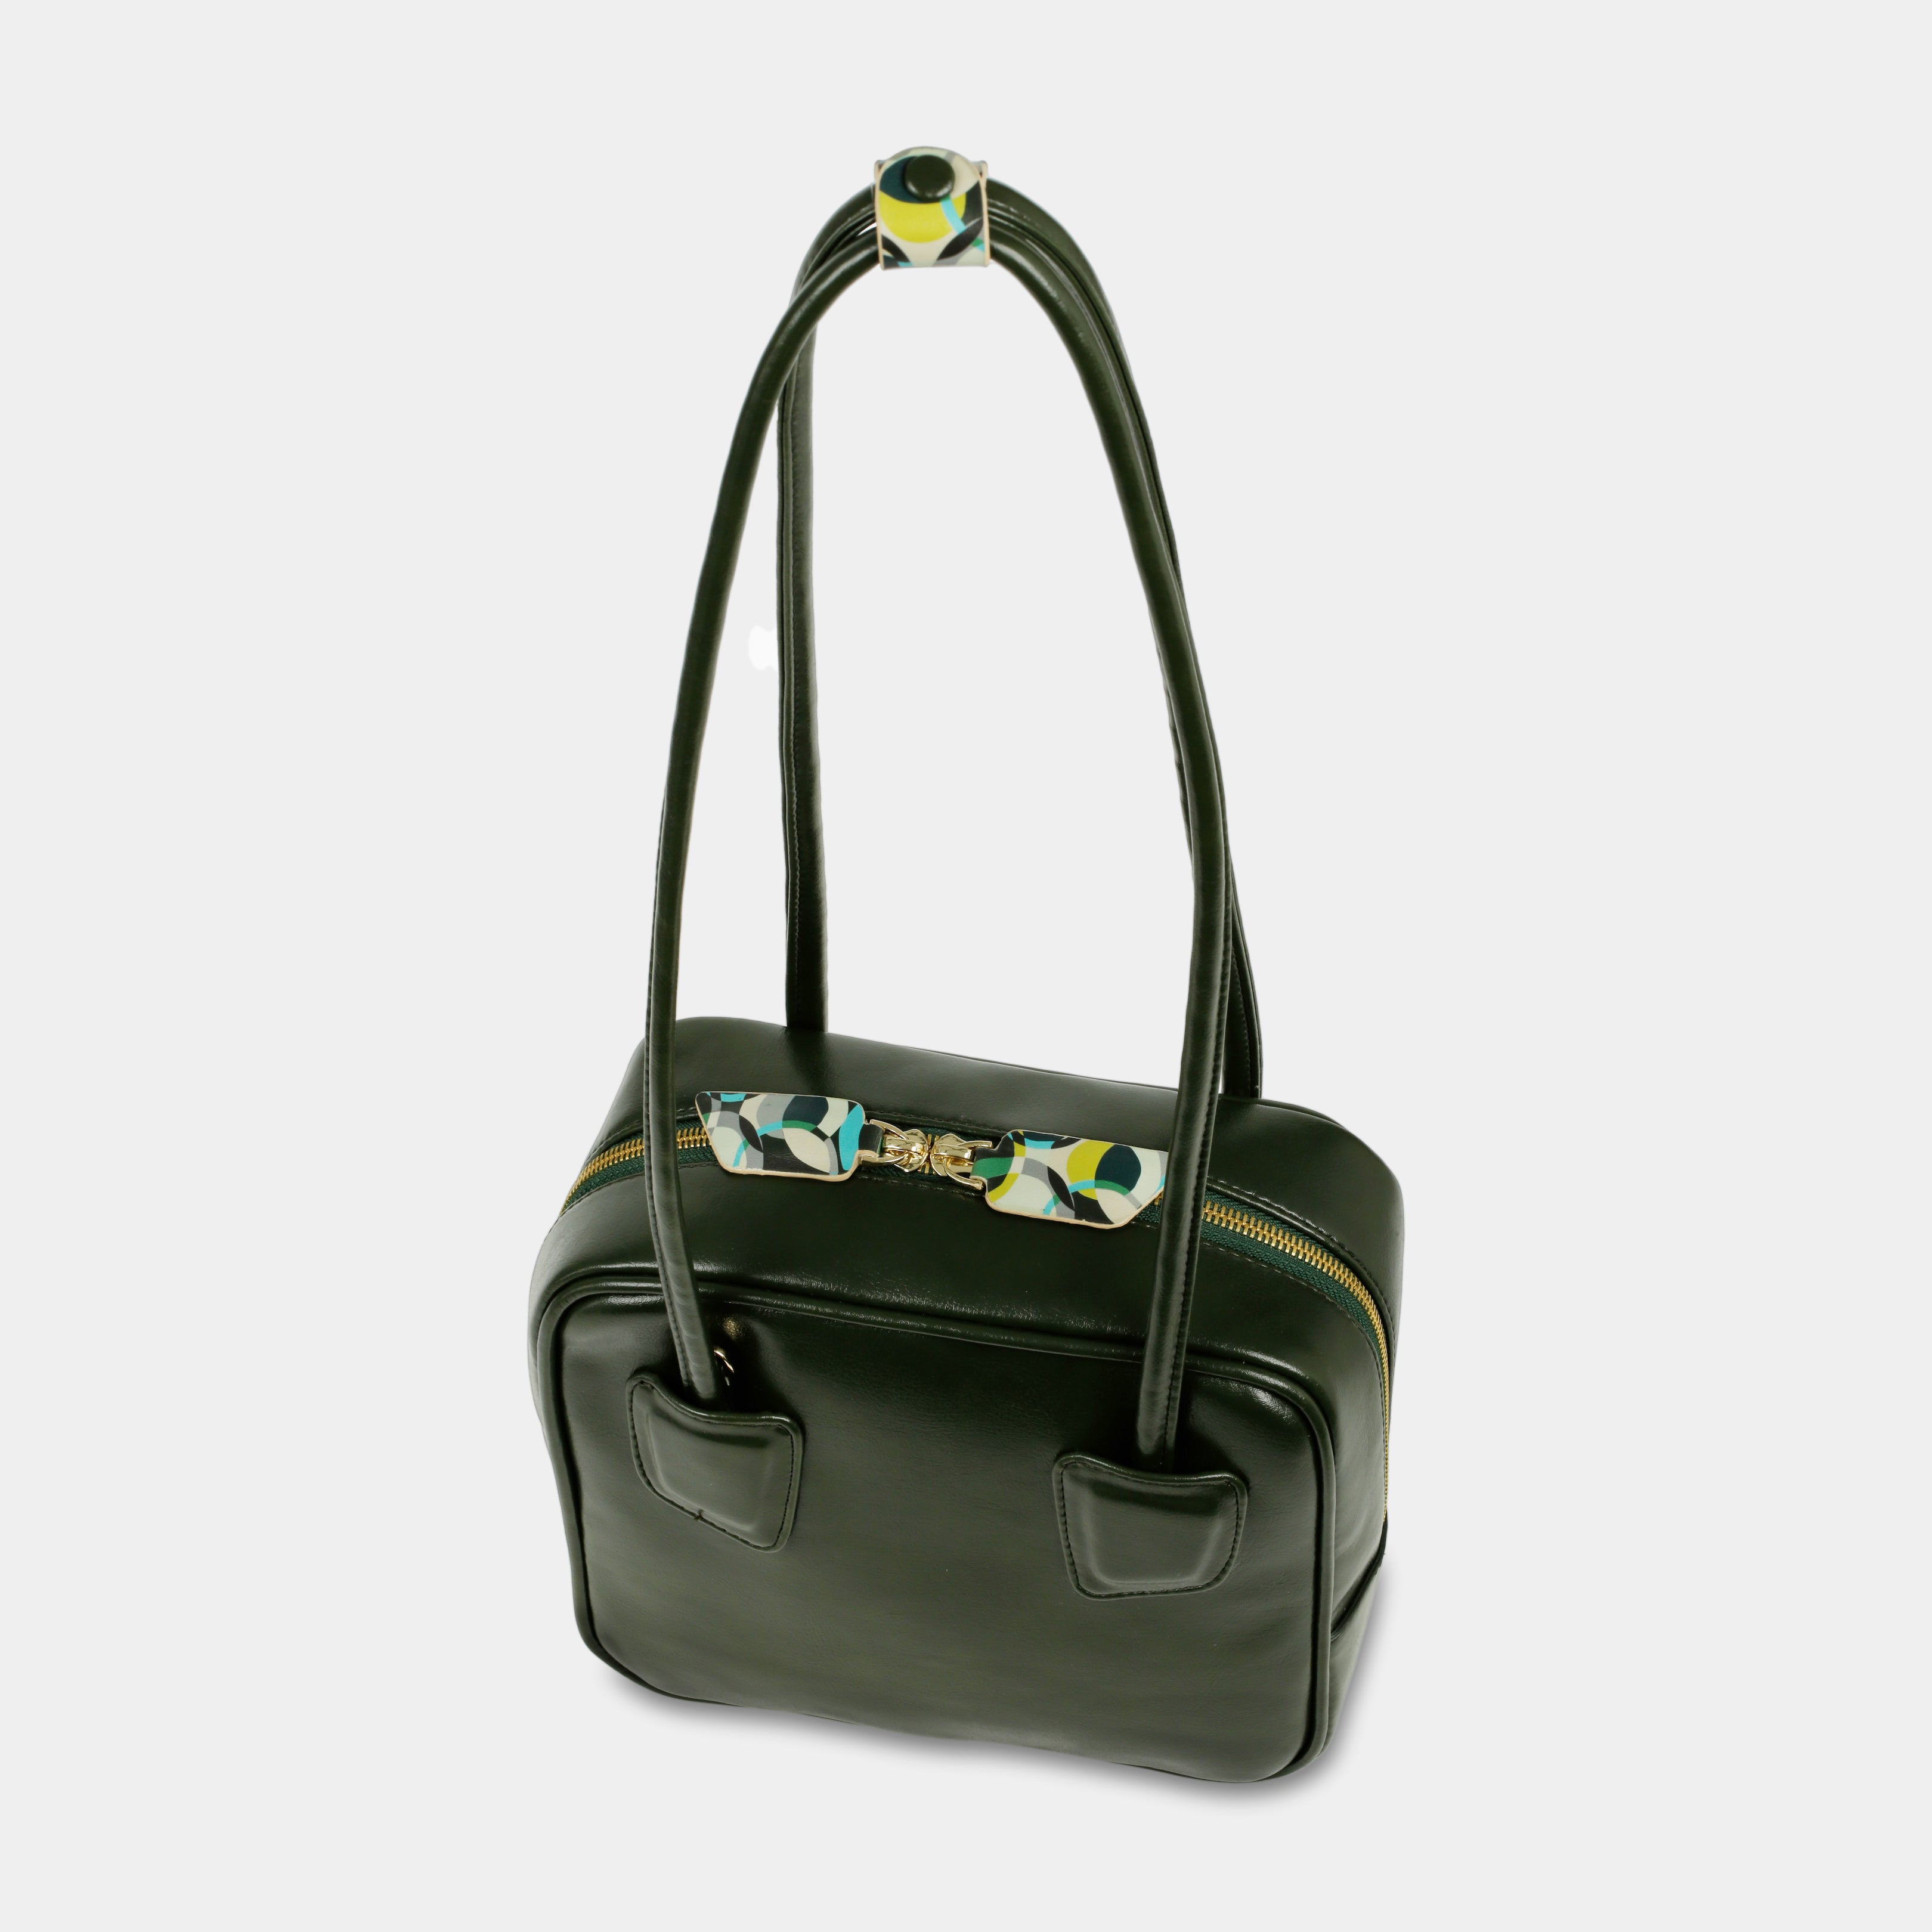 SANDWICH bag in green and black